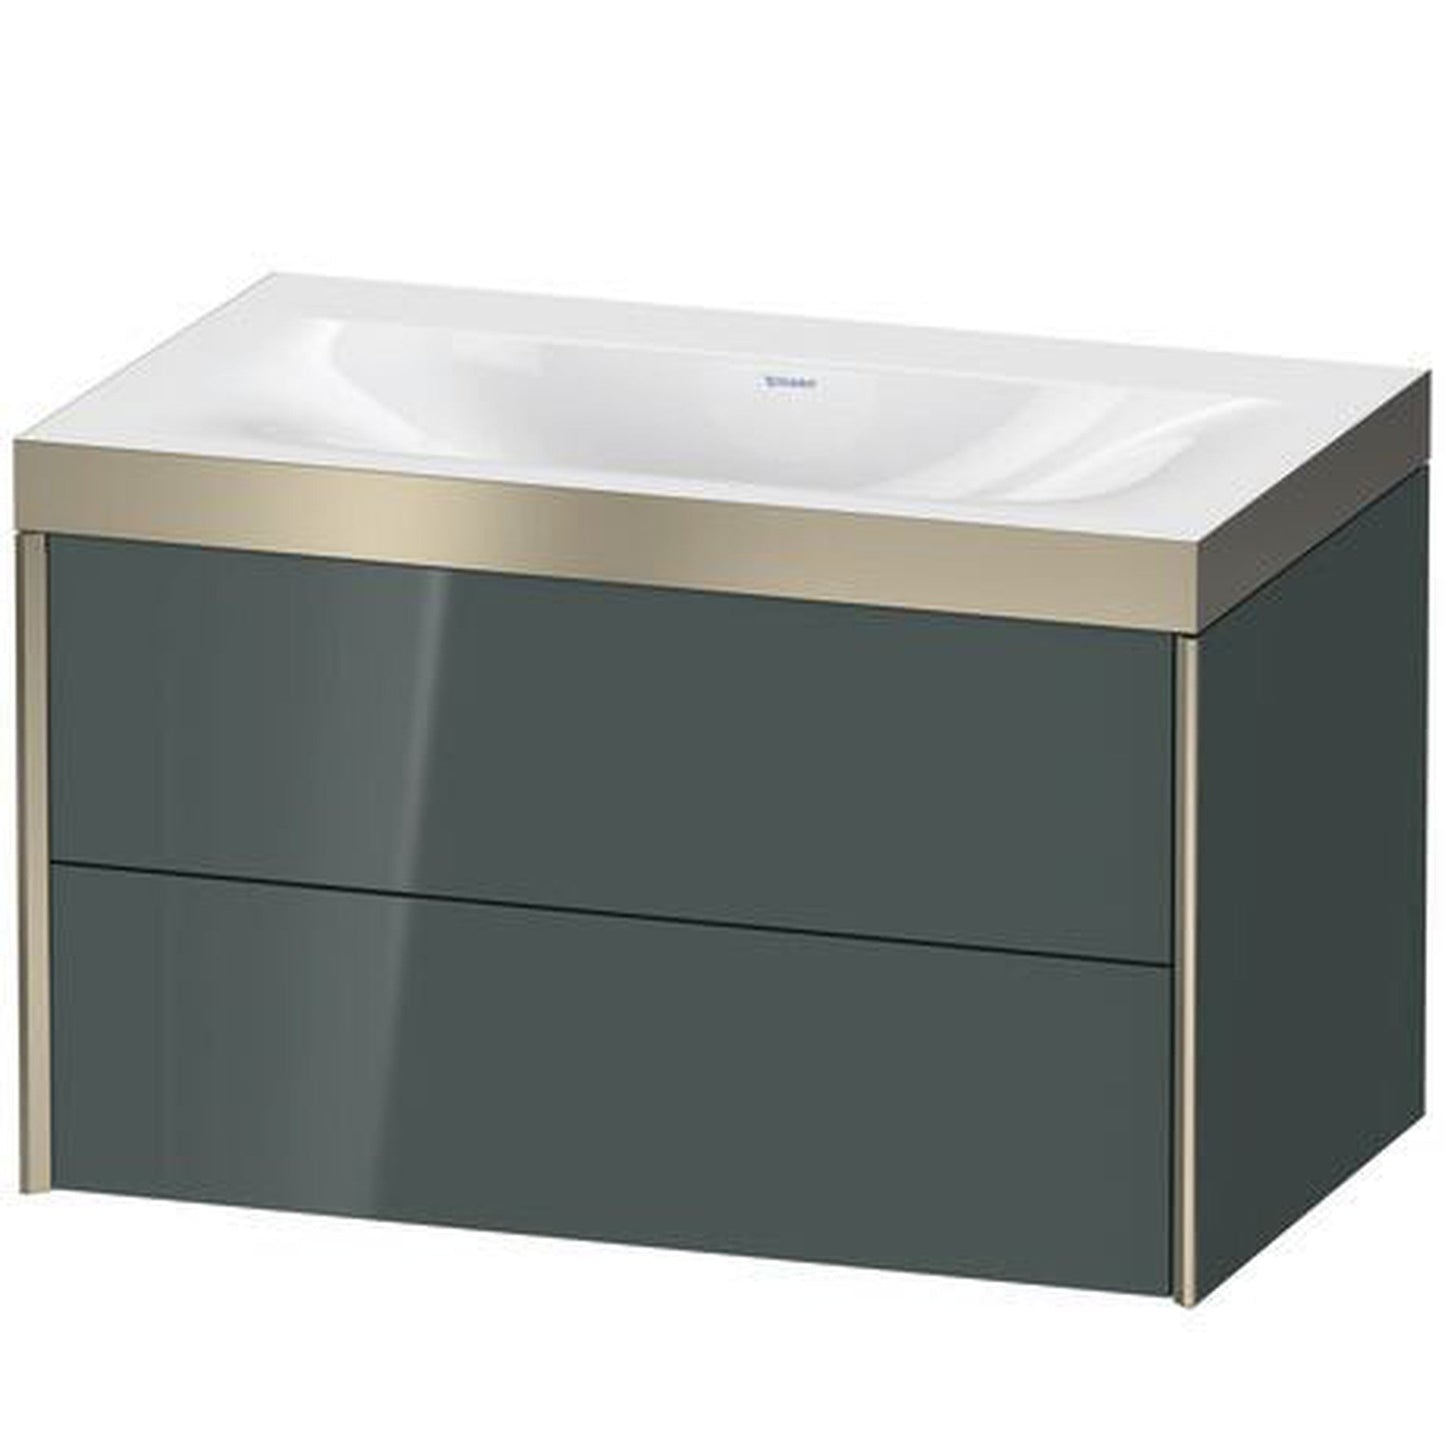 Duravit Xviu 31" x 20" x 19" Two Drawer C-Bonded Wall-Mount Vanity Kit Without Tap Hole, Dolomite Gray (XV4615NB138P)